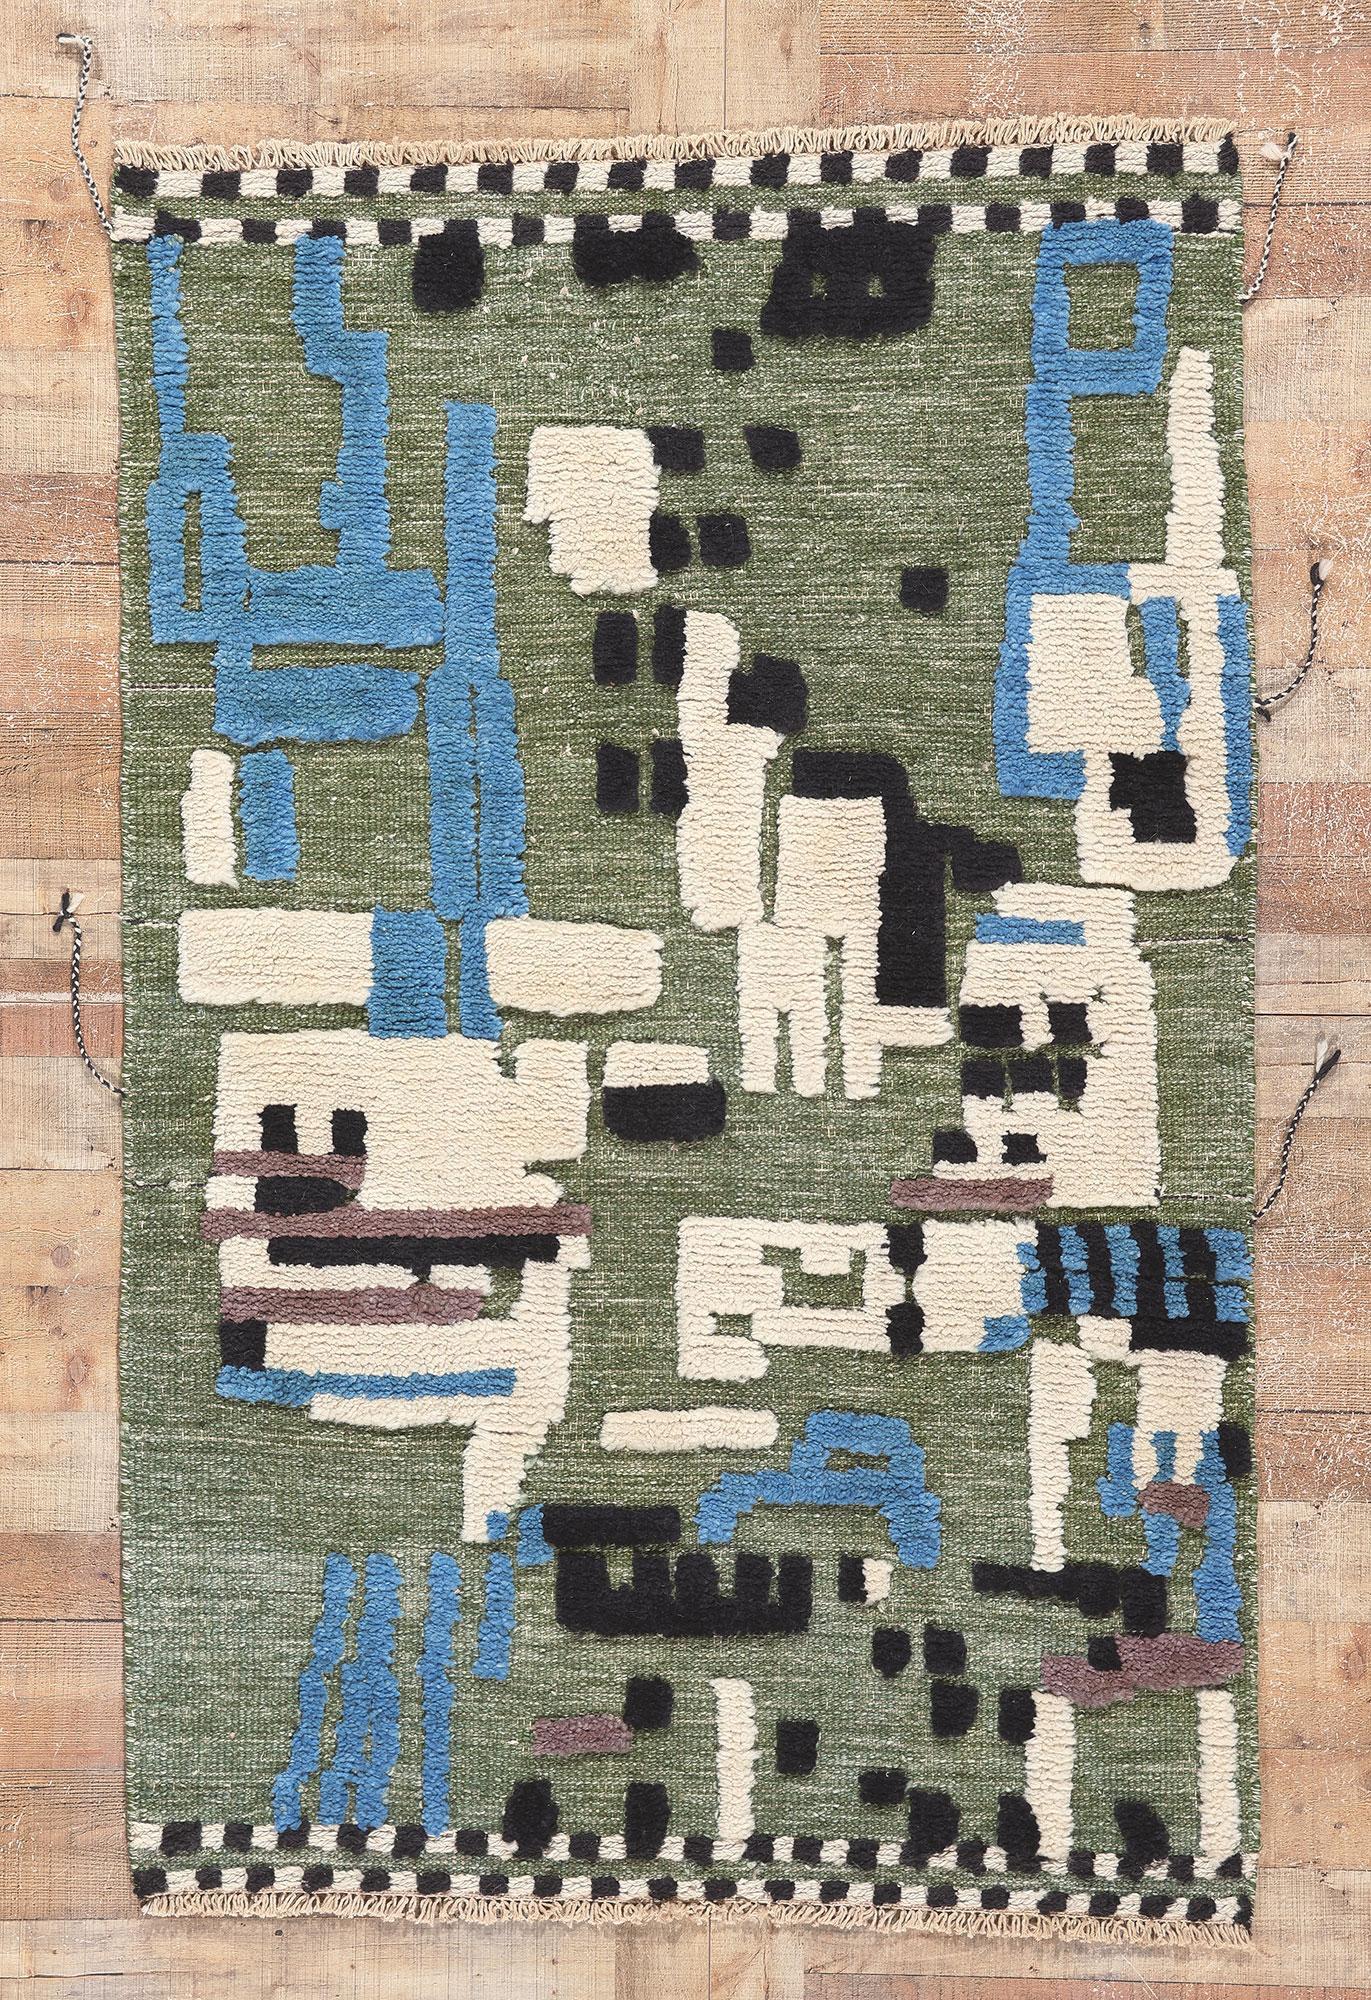 80993 Modern Moroccan High-Low Rug, 04'01 x 06'03. 
Emanating Biophilic Design with incredible detail and texture, this Moroccan high-low rug is a captivating vision of woven beauty. The raised design and earthy colorway woven into this piece work